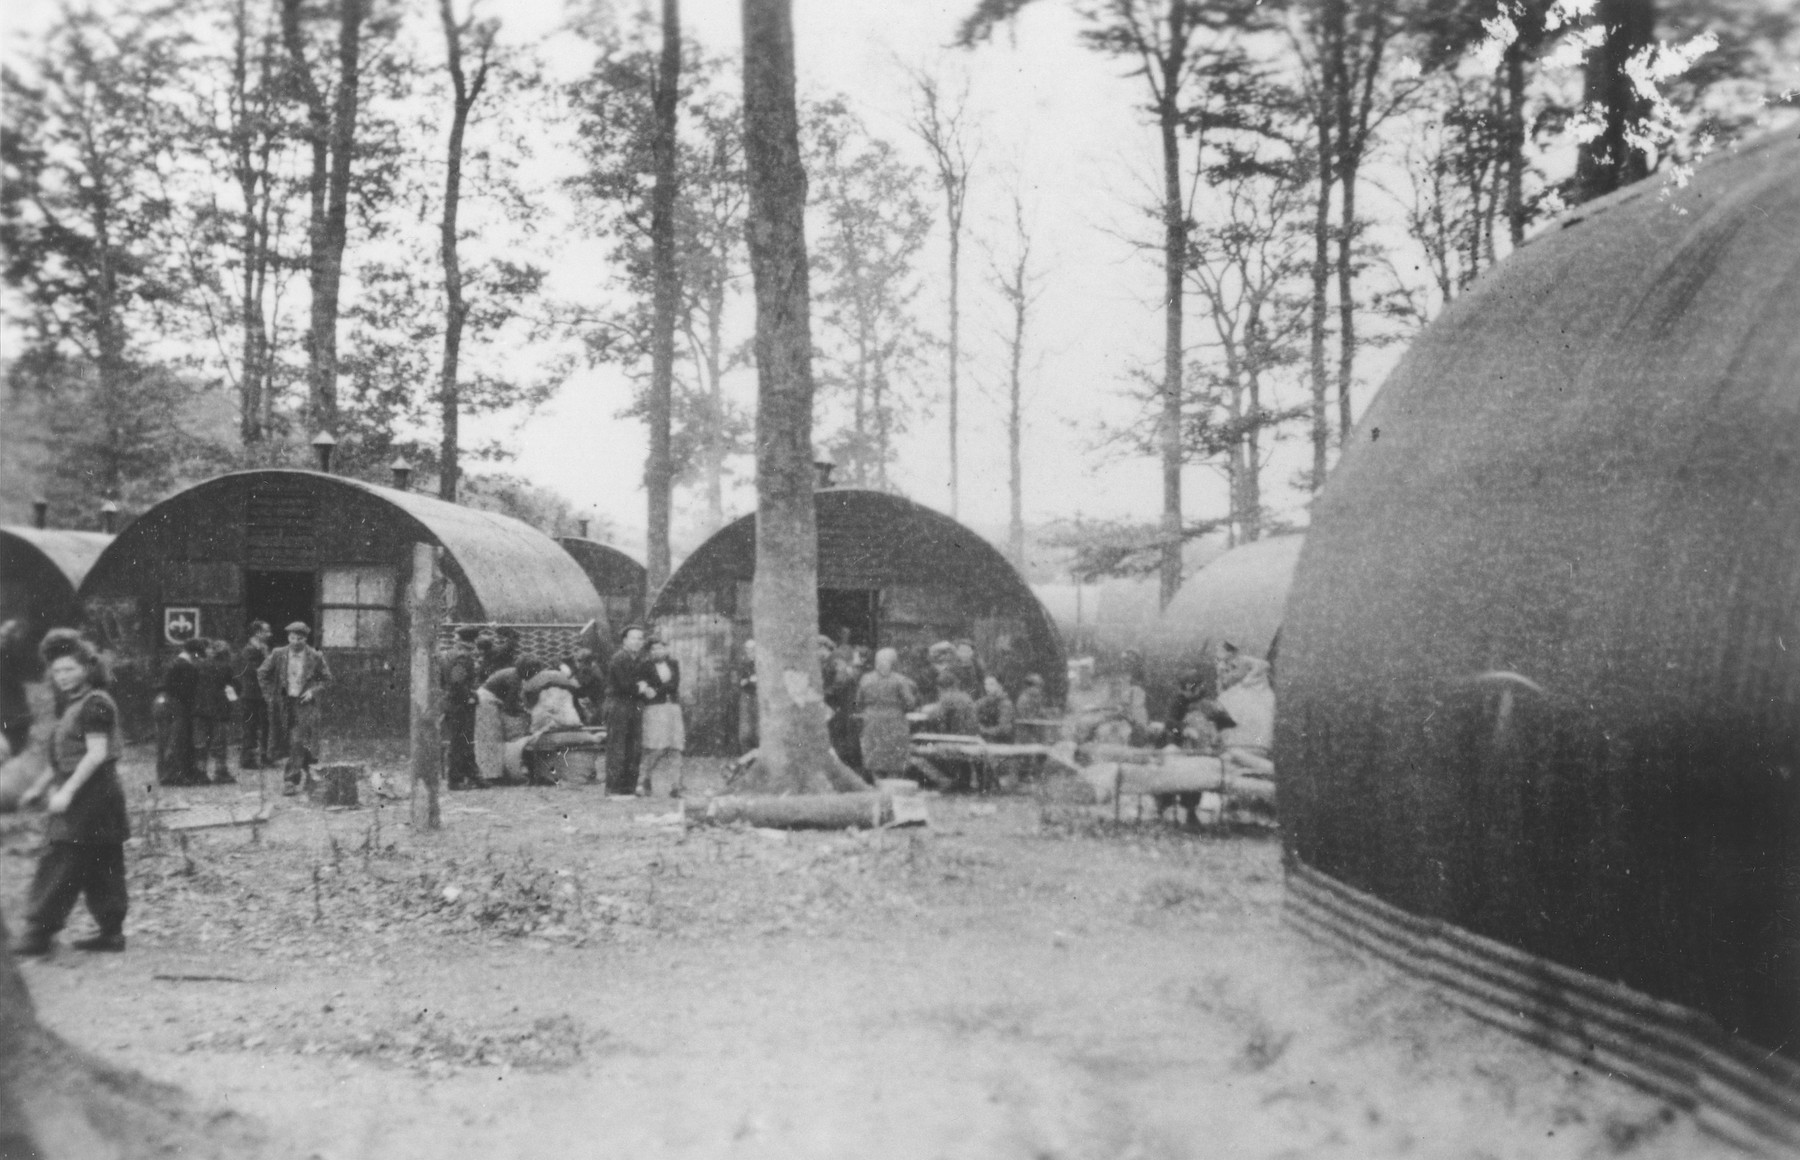 Former passengers on the Exodus 1947 gather outside a row of Nissen huts in the Poppendorf displaced persons camp.